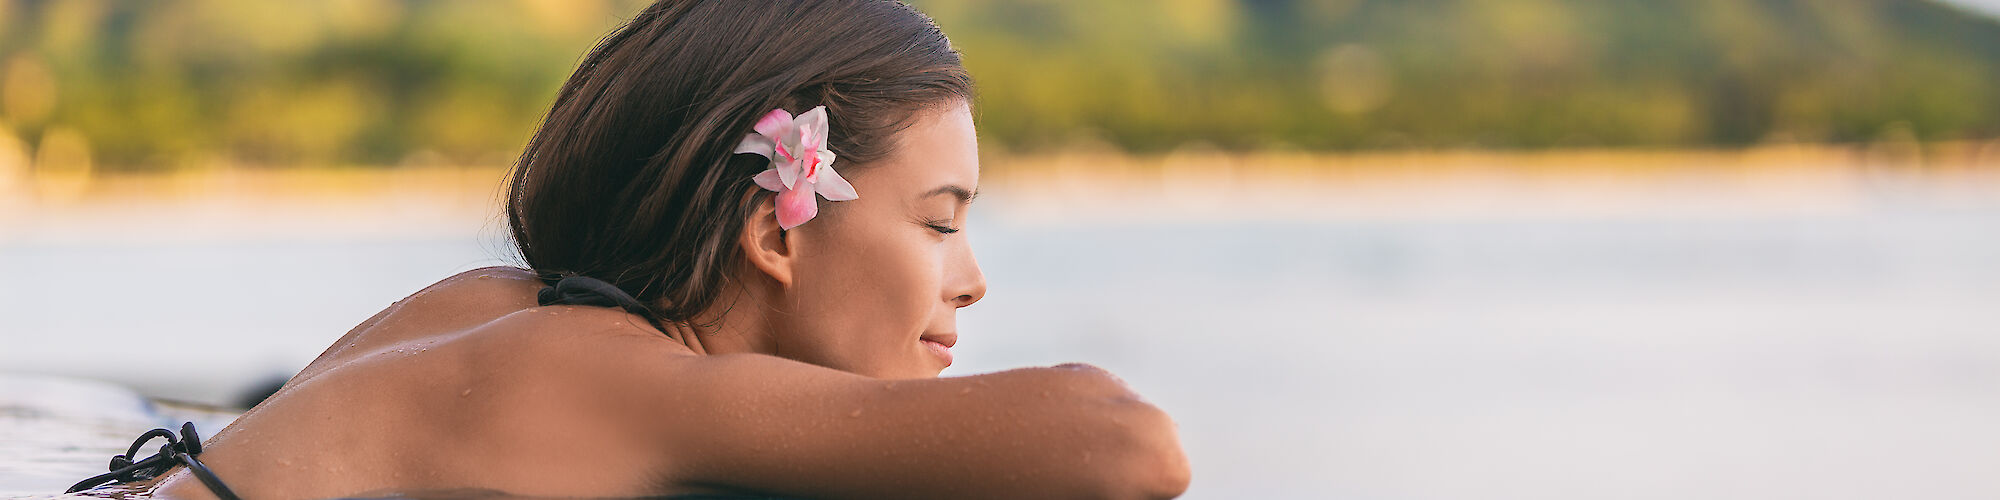 A woman with a flower in her hair is relaxing in a pool with a view of a mountain in the background at sunset.